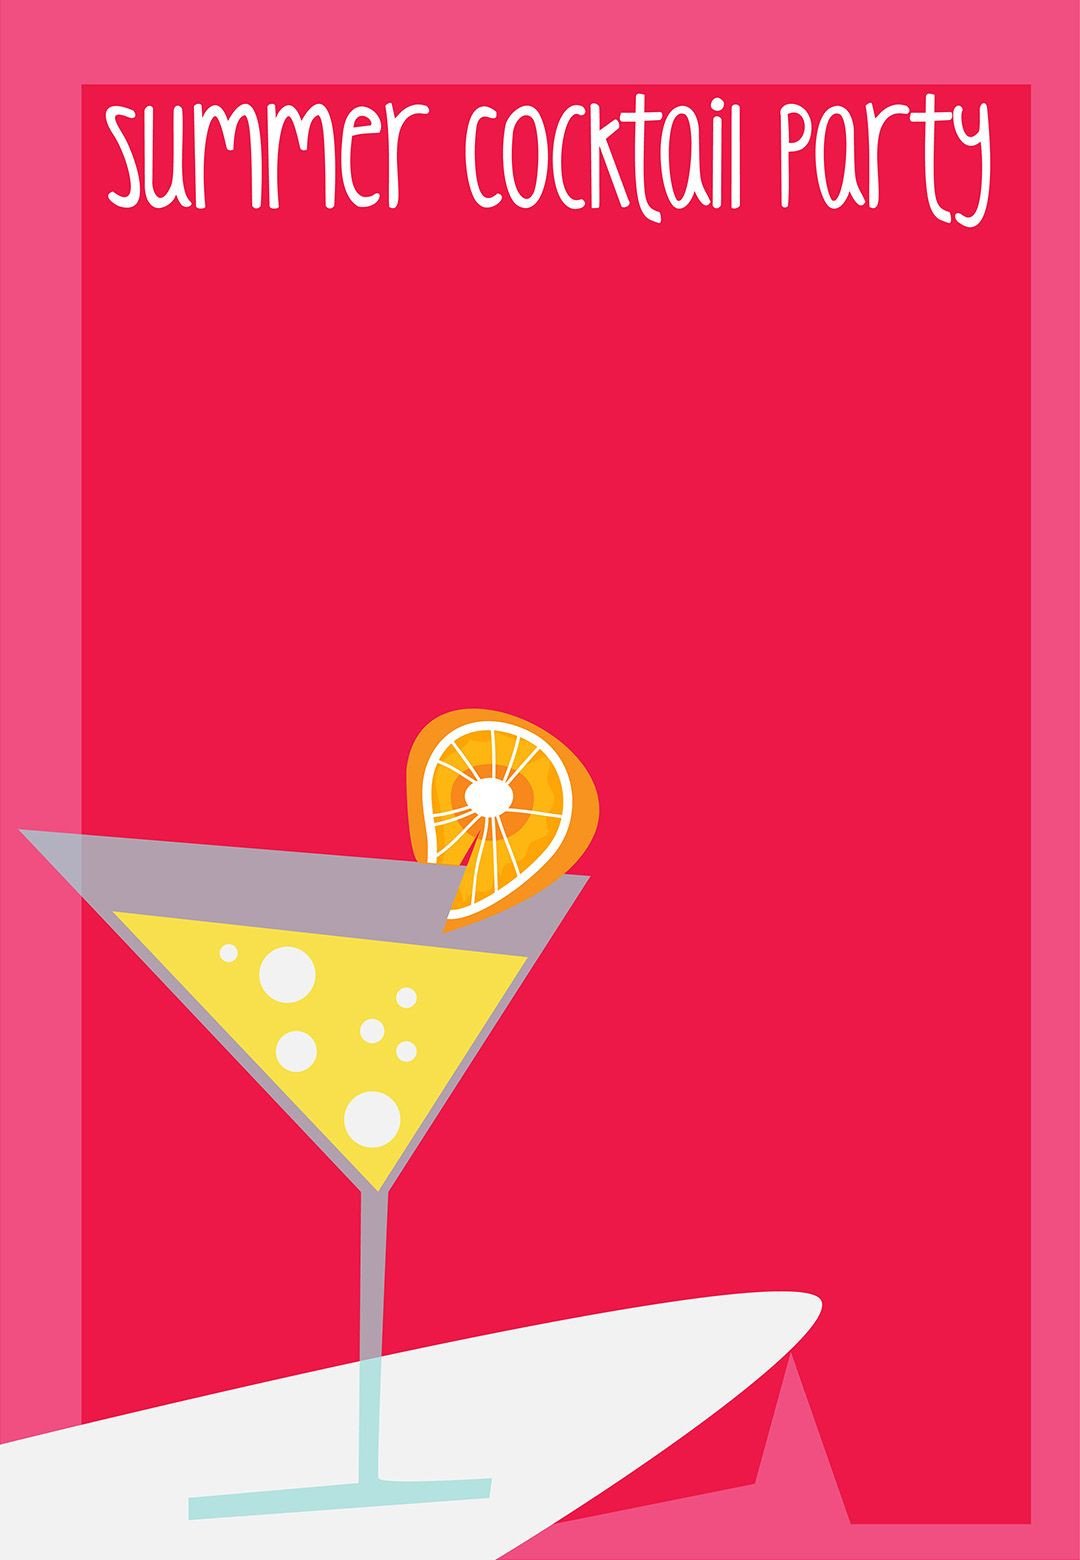 Summer Cocktail Party Invitation Free Printable